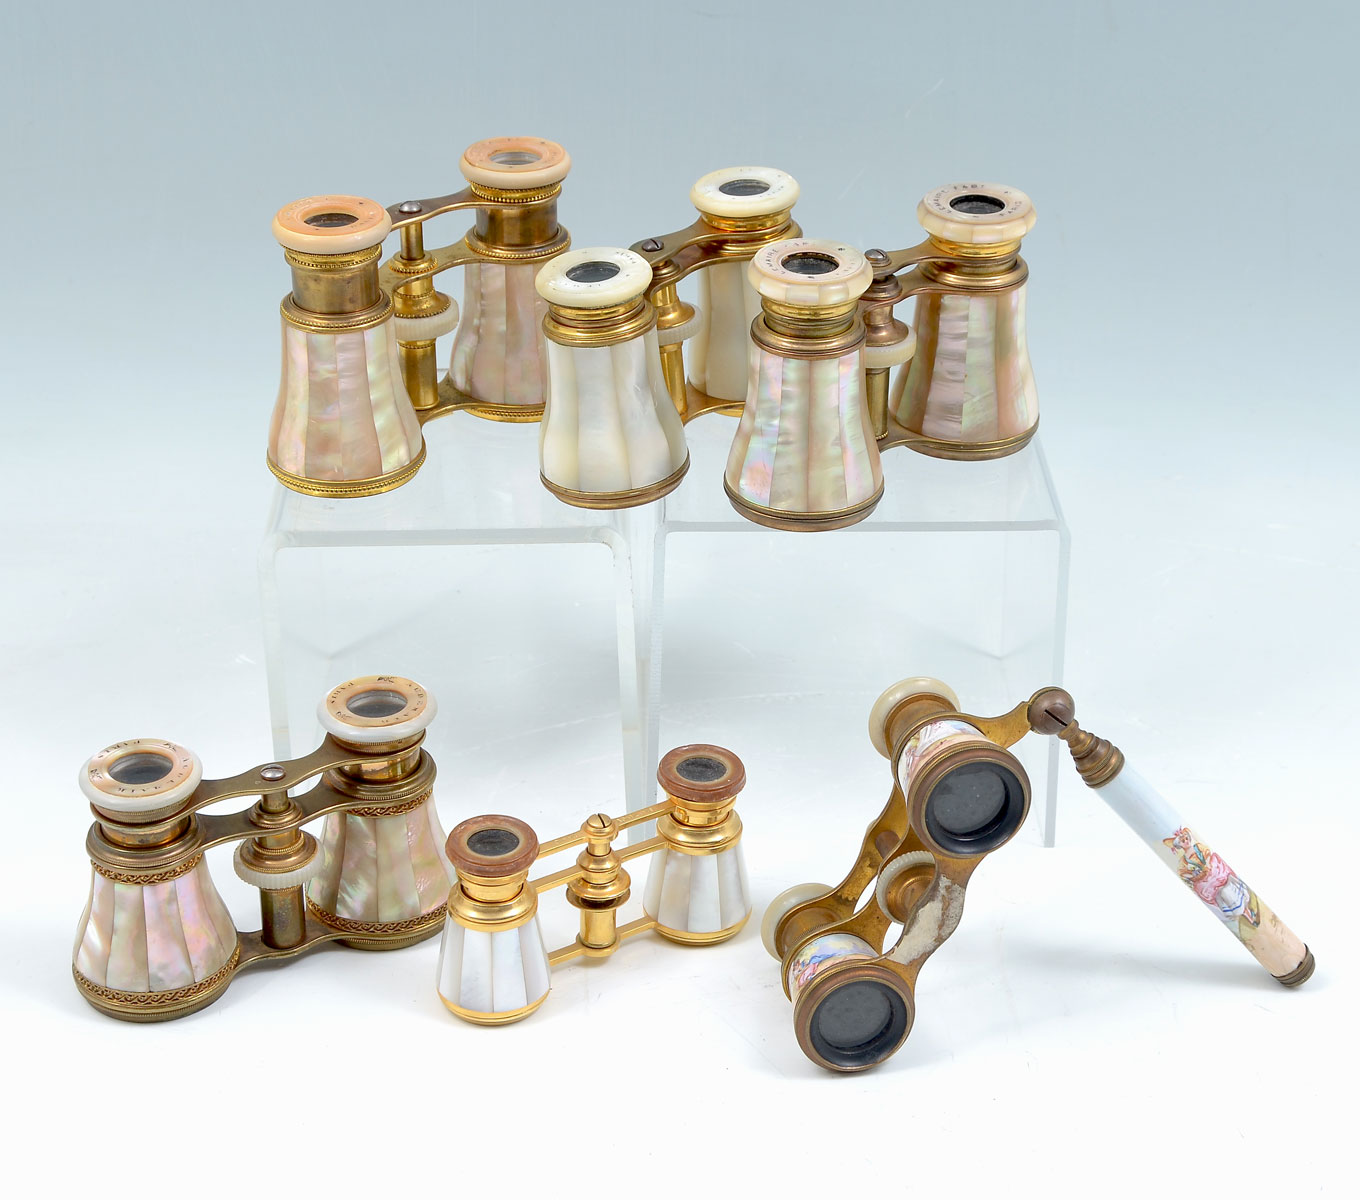 6 PIECE FRENCH OPERA GLASSES COLLECTION  36d24d